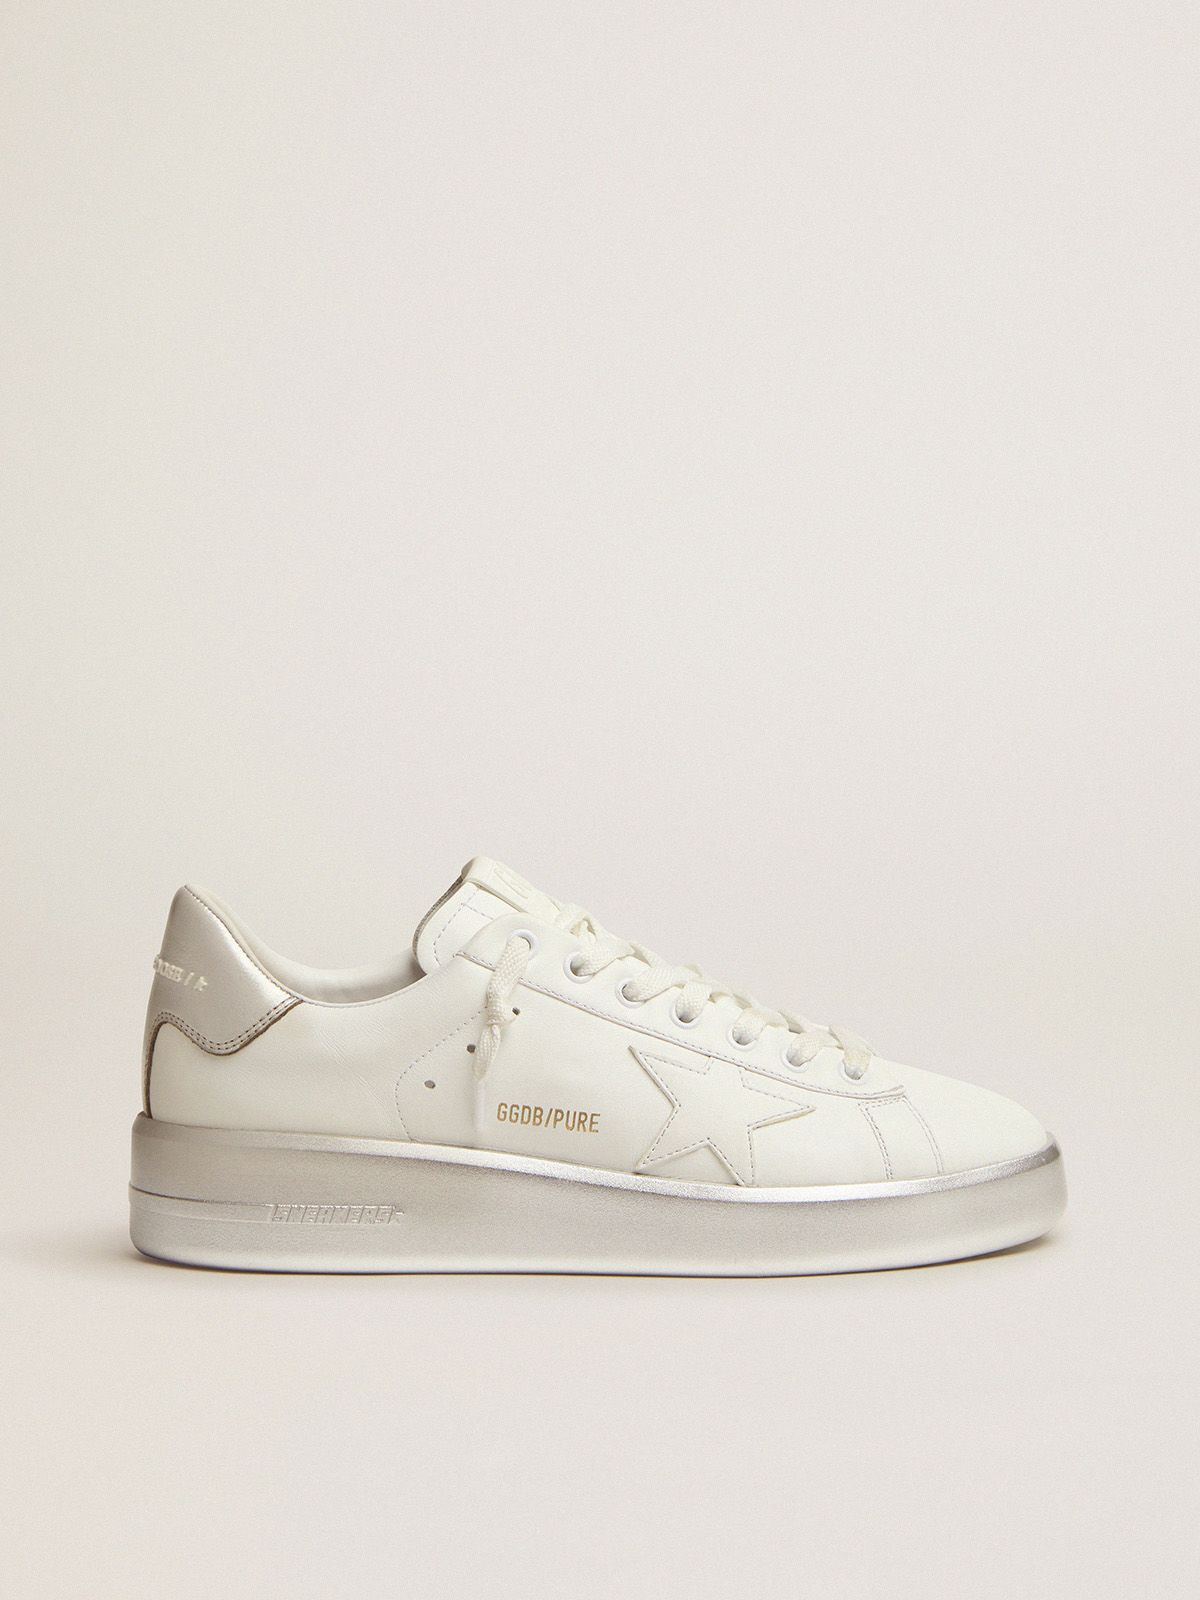 golden goose in with white tab and heel silver foxing sneakers leather Purestar laminated